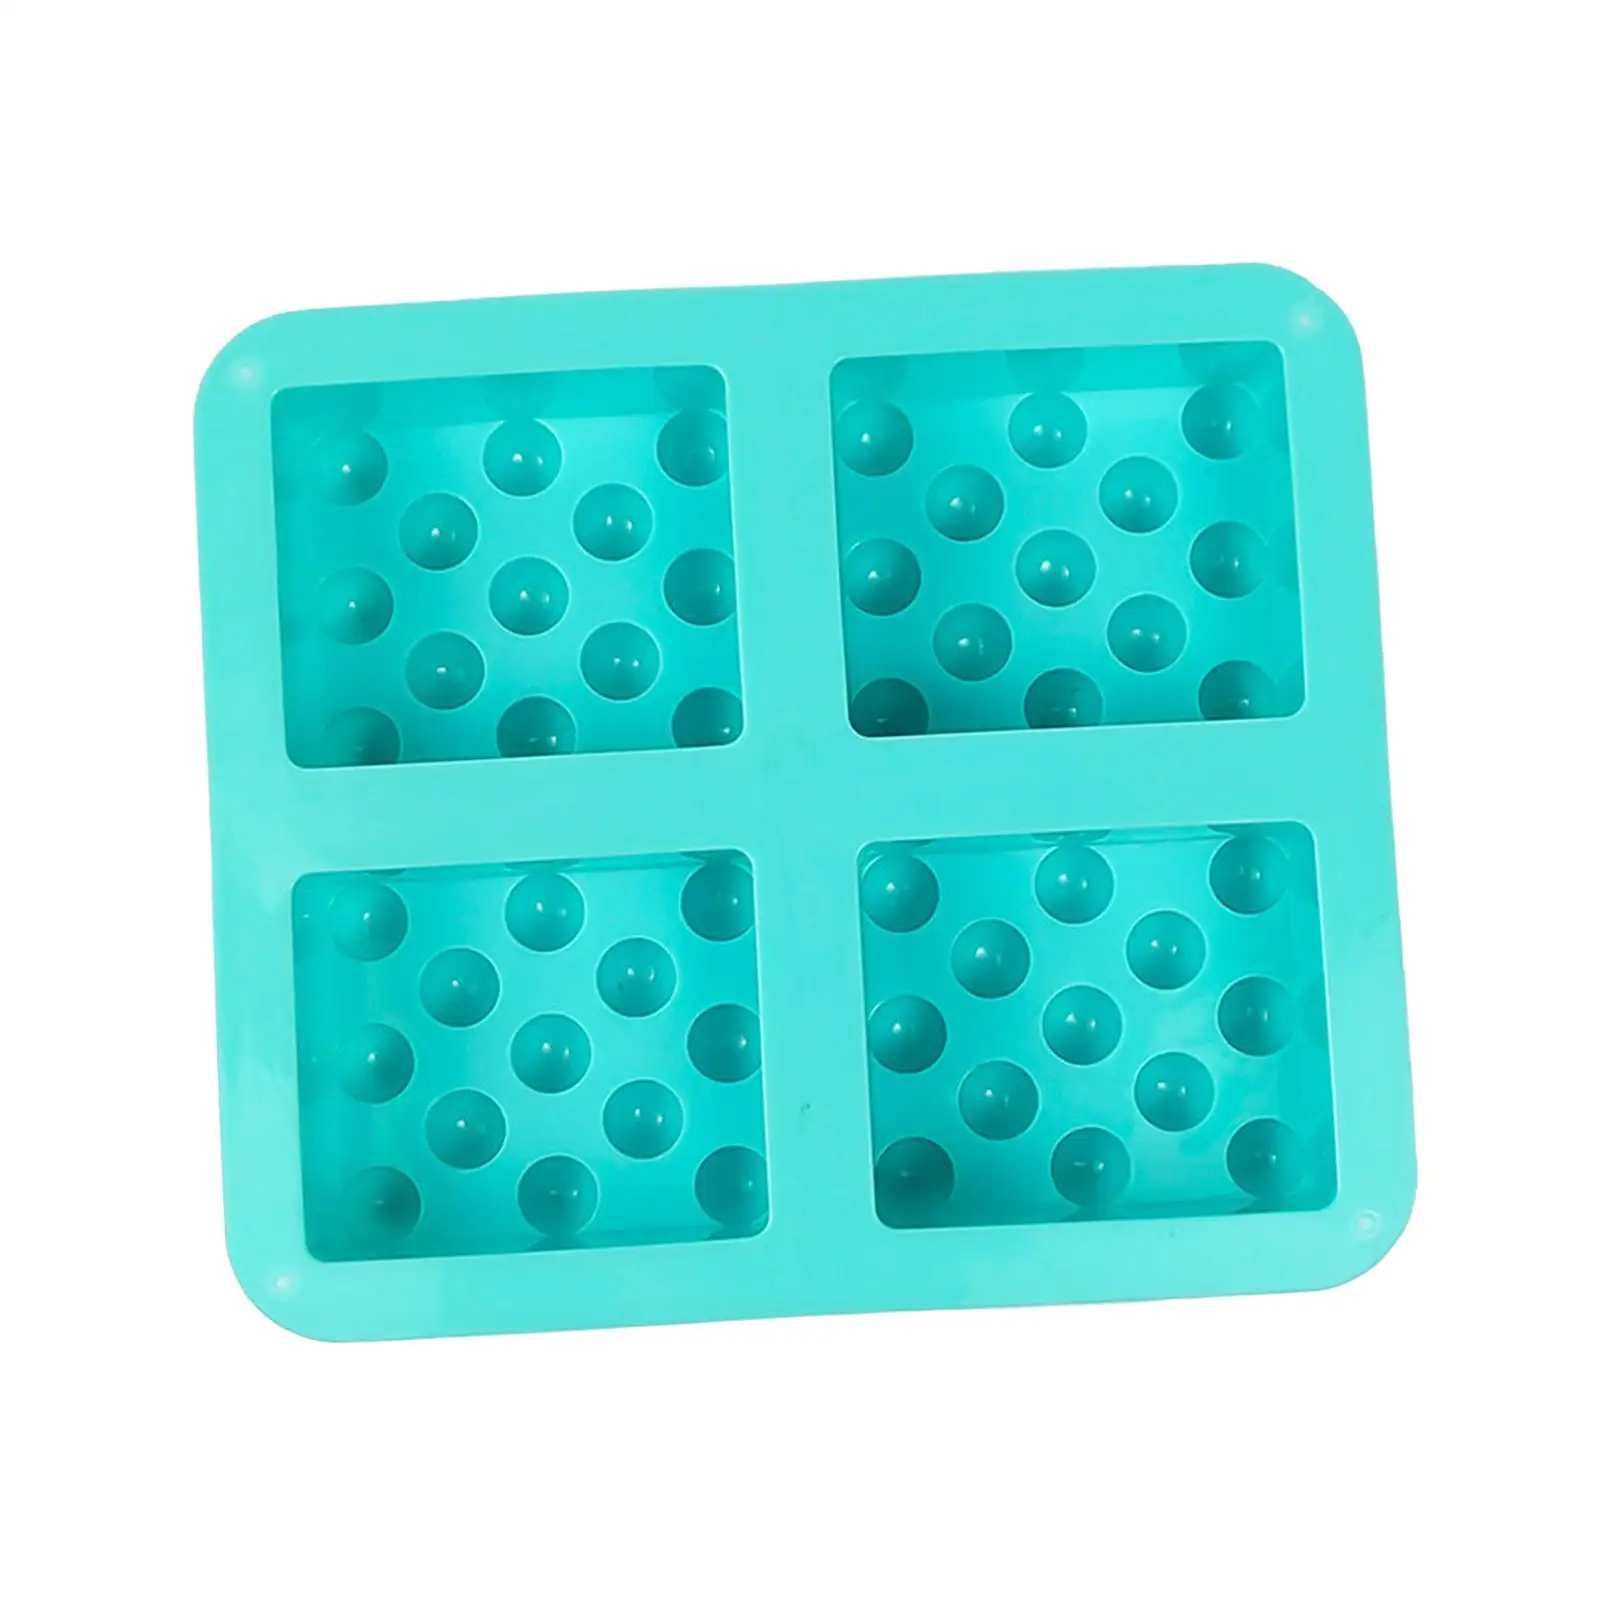 Silicone Soap Mould Resin Casting Art Candle Making Silicone Soap Making Model DIY Crafting Silicone Mould for Kids Accessories